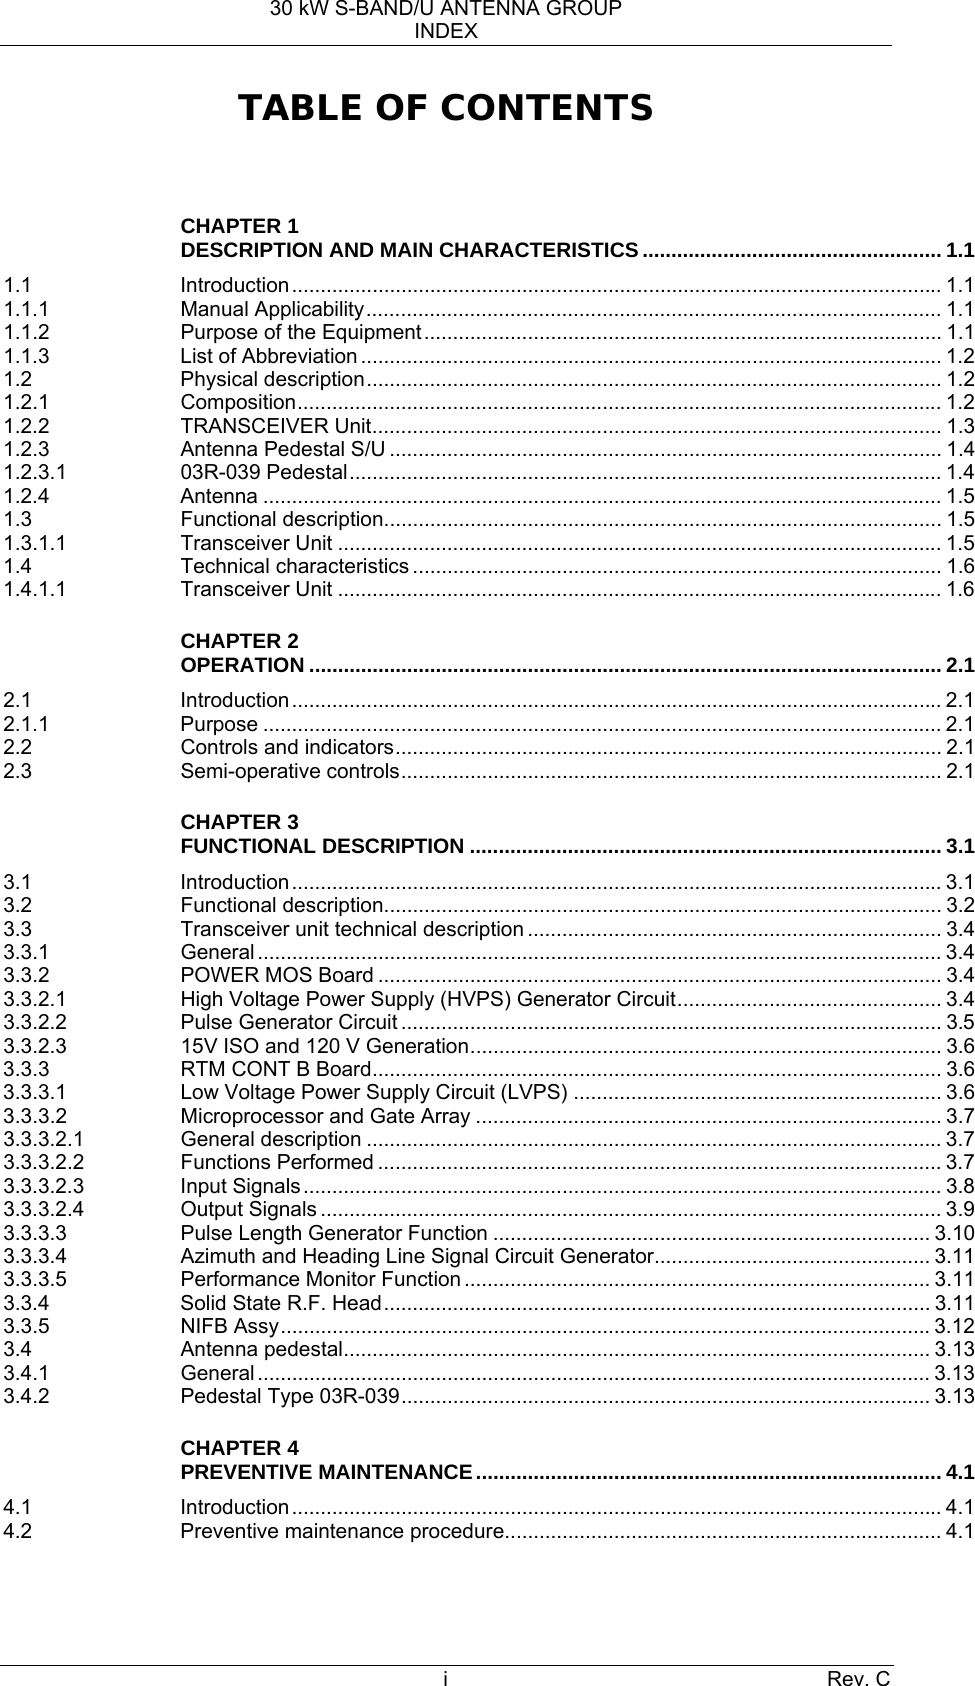 30 kW S-BAND/U ANTENNA GROUP INDEX i Rev. C TABLE OF CONTENTS   CHAPTER 1 DESCRIPTION AND MAIN CHARACTERISTICS .................................................... 1.1 1.1 Introduction................................................................................................................. 1.1 1.1.1 Manual Applicability.................................................................................................... 1.1 1.1.2 Purpose of the Equipment.......................................................................................... 1.1 1.1.3 List of Abbreviation ..................................................................................................... 1.2 1.2 Physical description.................................................................................................... 1.2 1.2.1 Composition................................................................................................................ 1.2 1.2.2 TRANSCEIVER Unit................................................................................................... 1.3 1.2.3 Antenna Pedestal S/U ................................................................................................ 1.4 1.2.3.1 03R-039 Pedestal....................................................................................................... 1.4 1.2.4 Antenna ...................................................................................................................... 1.5 1.3 Functional description................................................................................................. 1.5 1.3.1.1 Transceiver Unit ......................................................................................................... 1.5 1.4 Technical characteristics ............................................................................................ 1.6 1.4.1.1 Transceiver Unit ......................................................................................................... 1.6  CHAPTER 2 OPERATION .............................................................................................................. 2.1 2.1 Introduction................................................................................................................. 2.1 2.1.1 Purpose ...................................................................................................................... 2.1 2.2 Controls and indicators............................................................................................... 2.1 2.3 Semi-operative controls.............................................................................................. 2.1  CHAPTER 3 FUNCTIONAL DESCRIPTION .................................................................................. 3.1 3.1 Introduction................................................................................................................. 3.1 3.2 Functional description................................................................................................. 3.2 3.3  Transceiver unit technical description ........................................................................ 3.4 3.3.1 General....................................................................................................................... 3.4 3.3.2 POWER MOS Board .................................................................................................. 3.4 3.3.2.1  High Voltage Power Supply (HVPS) Generator Circuit.............................................. 3.4 3.3.2.2 Pulse Generator Circuit .............................................................................................. 3.5 3.3.2.3  15V ISO and 120 V Generation.................................................................................. 3.6 3.3.3 RTM CONT B Board................................................................................................... 3.6 3.3.3.1  Low Voltage Power Supply Circuit (LVPS) ................................................................ 3.6 3.3.3.2 Microprocessor and Gate Array ................................................................................. 3.7 3.3.3.2.1 General description .................................................................................................... 3.7 3.3.3.2.2 Functions Performed .................................................................................................. 3.7 3.3.3.2.3 Input Signals............................................................................................................... 3.8 3.3.3.2.4 Output Signals ............................................................................................................ 3.9 3.3.3.3  Pulse Length Generator Function ............................................................................ 3.10 3.3.3.4  Azimuth and Heading Line Signal Circuit Generator................................................ 3.11 3.3.3.5 Performance Monitor Function ................................................................................. 3.11 3.3.4 Solid State R.F. Head............................................................................................... 3.11 3.3.5 NIFB Assy................................................................................................................. 3.12 3.4 Antenna pedestal...................................................................................................... 3.13 3.4.1 General..................................................................................................................... 3.13 3.4.2 Pedestal Type 03R-039............................................................................................ 3.13  CHAPTER 4 PREVENTIVE MAINTENANCE................................................................................. 4.1 4.1 Introduction................................................................................................................. 4.1 4.2 Preventive maintenance procedure............................................................................ 4.1   